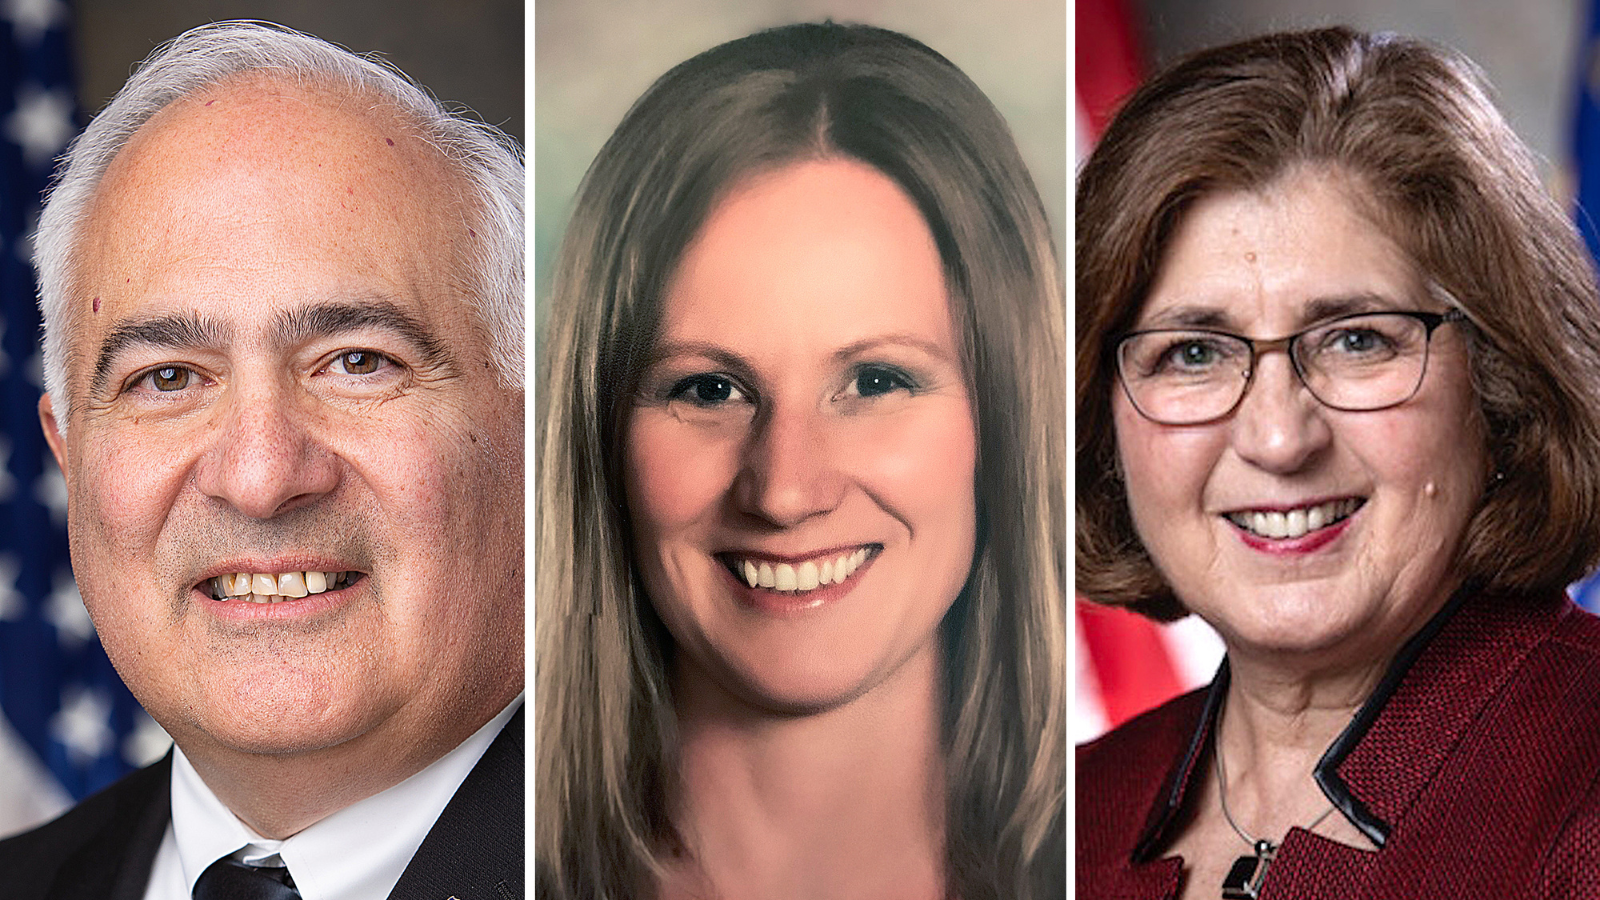 ‘Chaos, confusion and disruption’: 3 Republicans, 2 incumbents, face off in 86th Assembly District